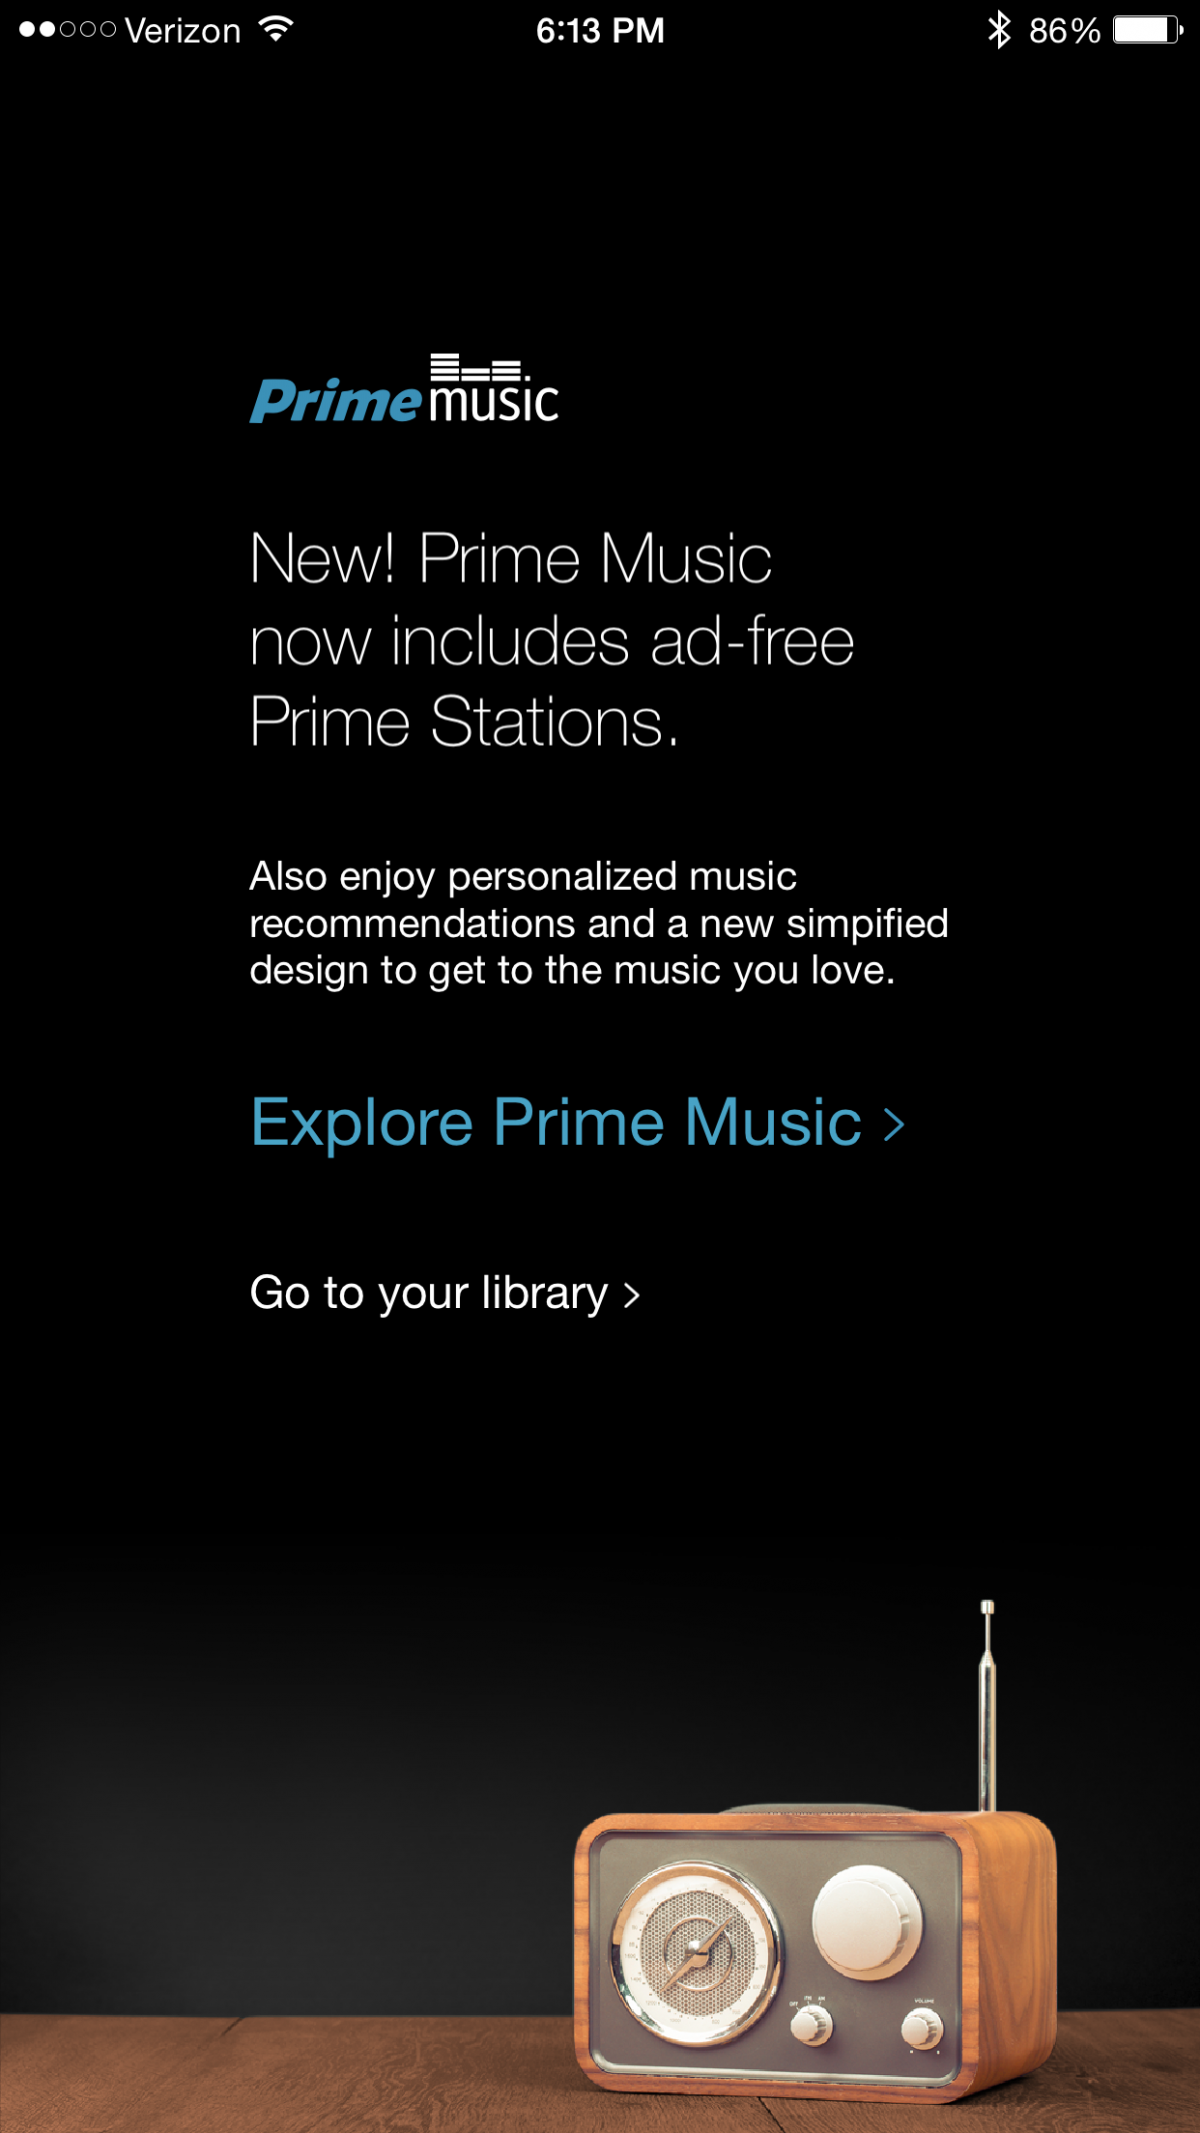 Amazon Prime Music Gets Ad-Free Prime Stations with Unlimited Skips